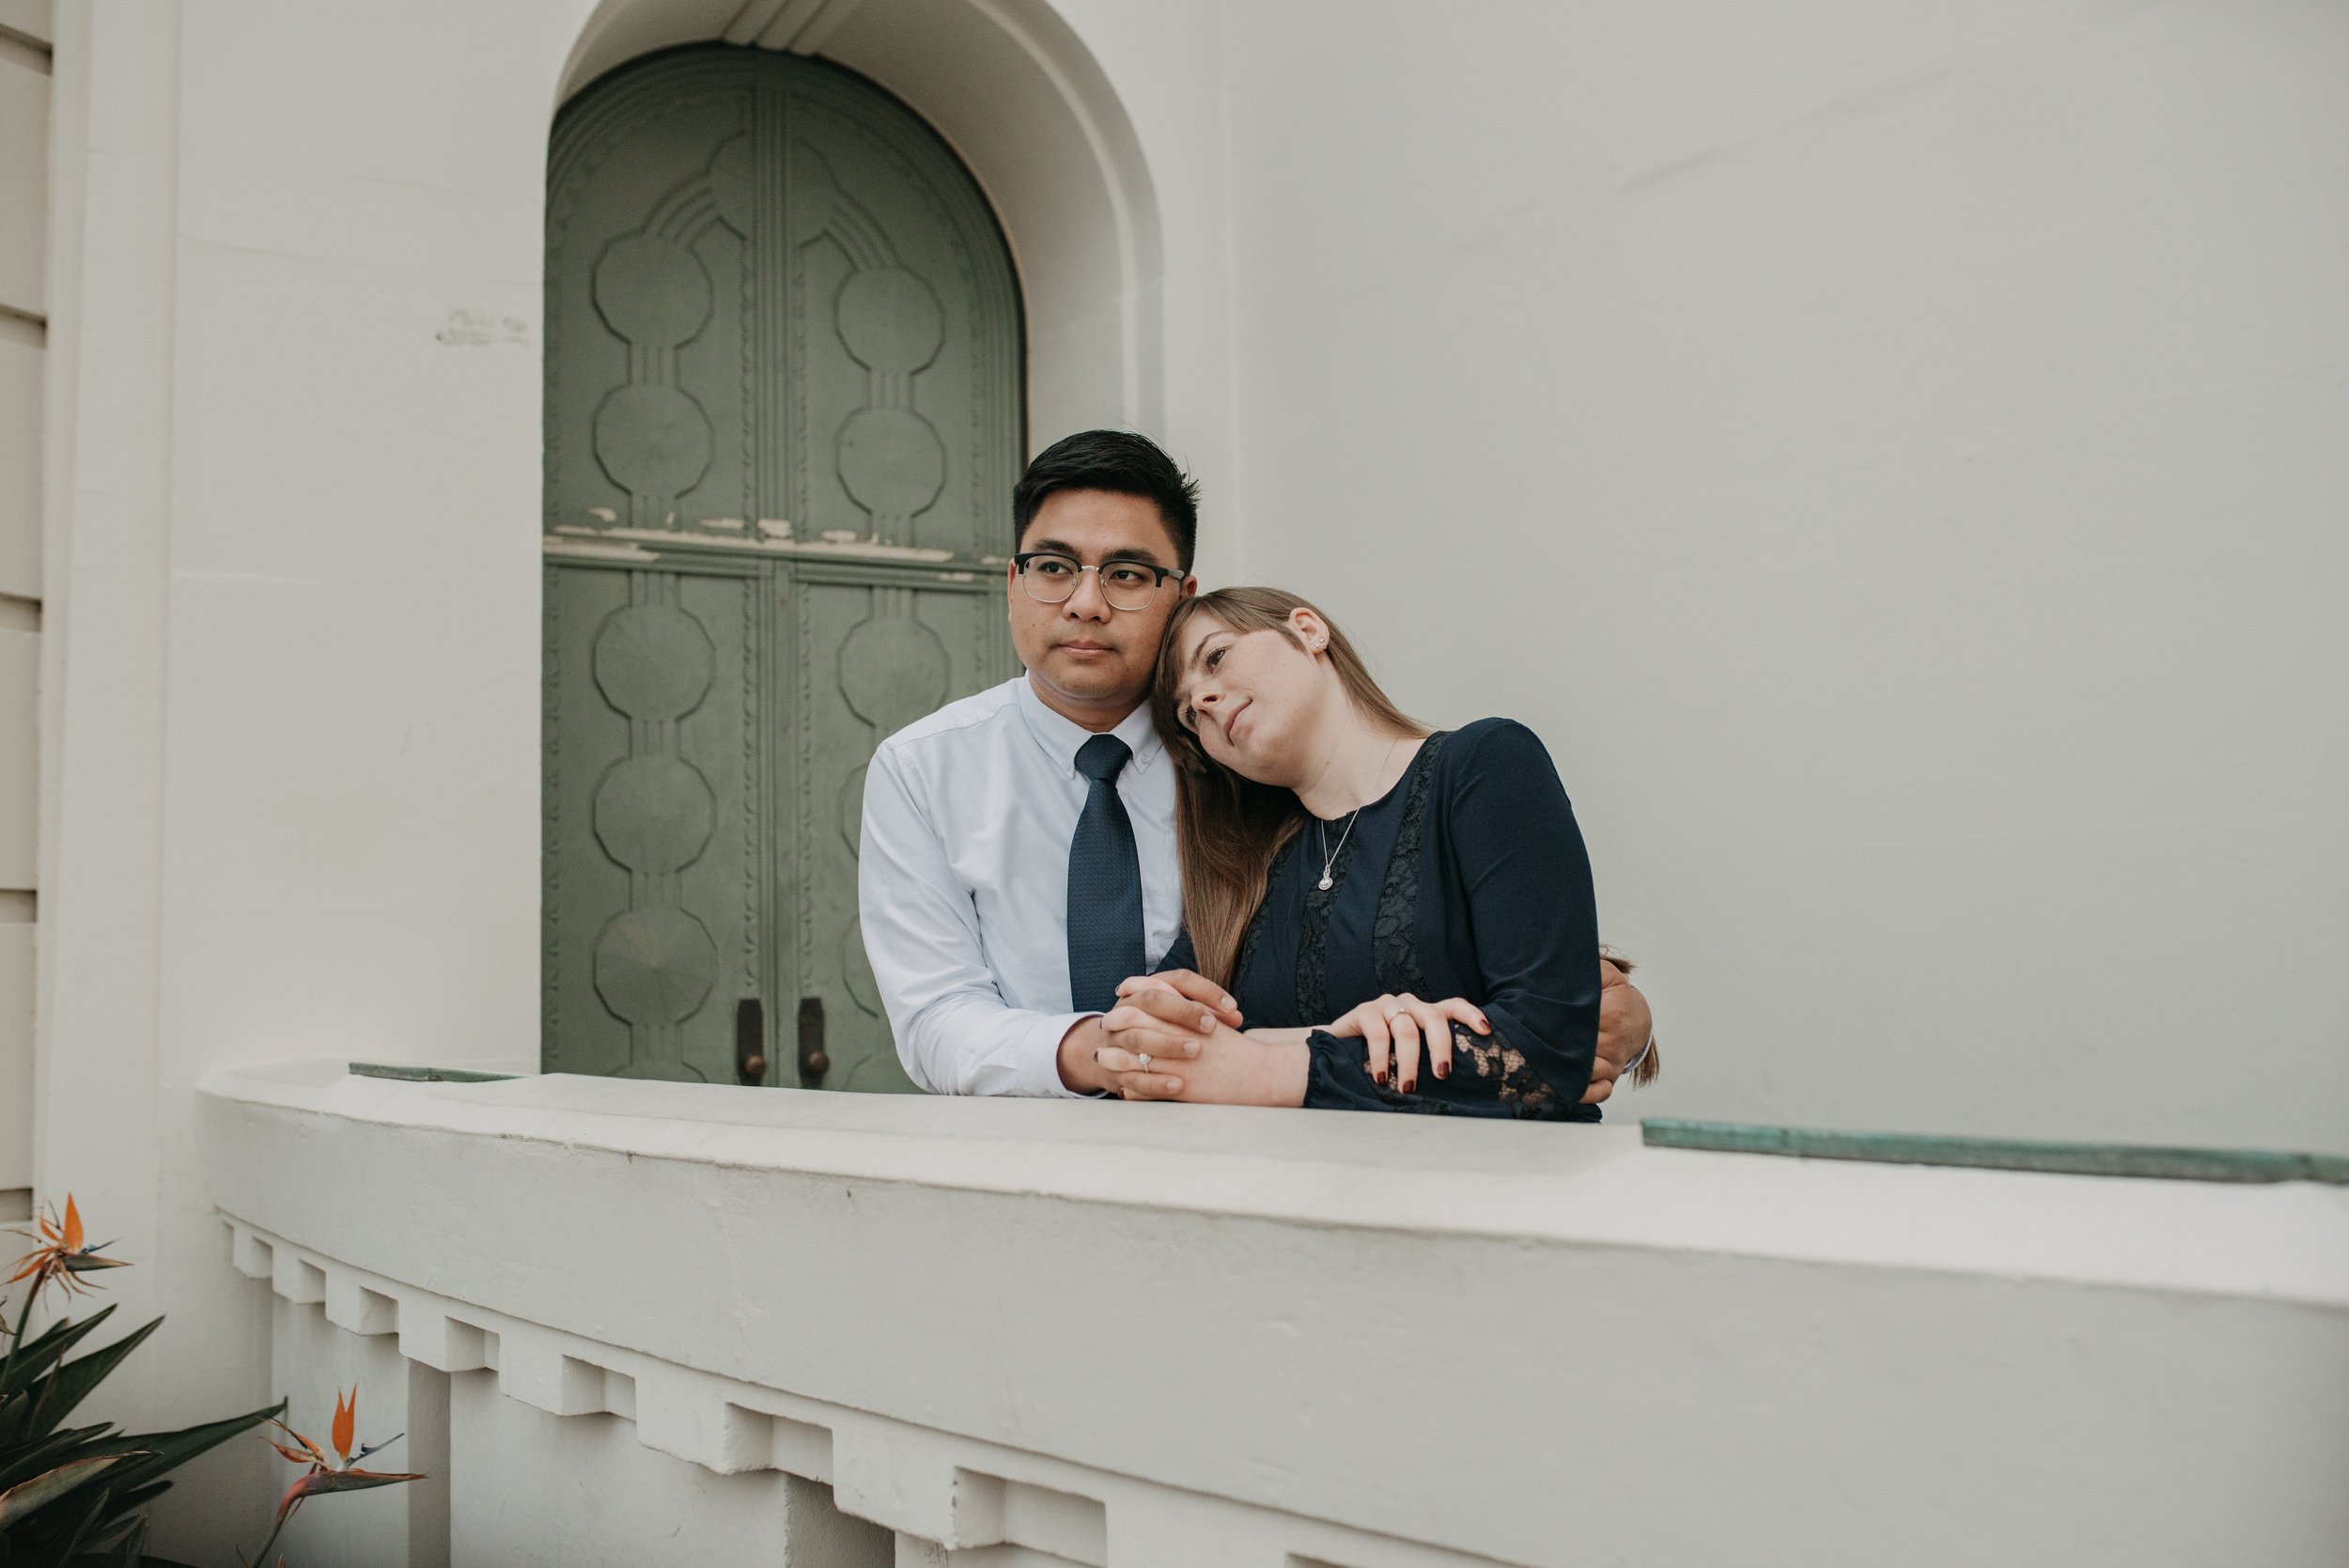 losangeles-engagement-session-griffith-observatory-southerncalifornia-wedding-photographer-30.jpg